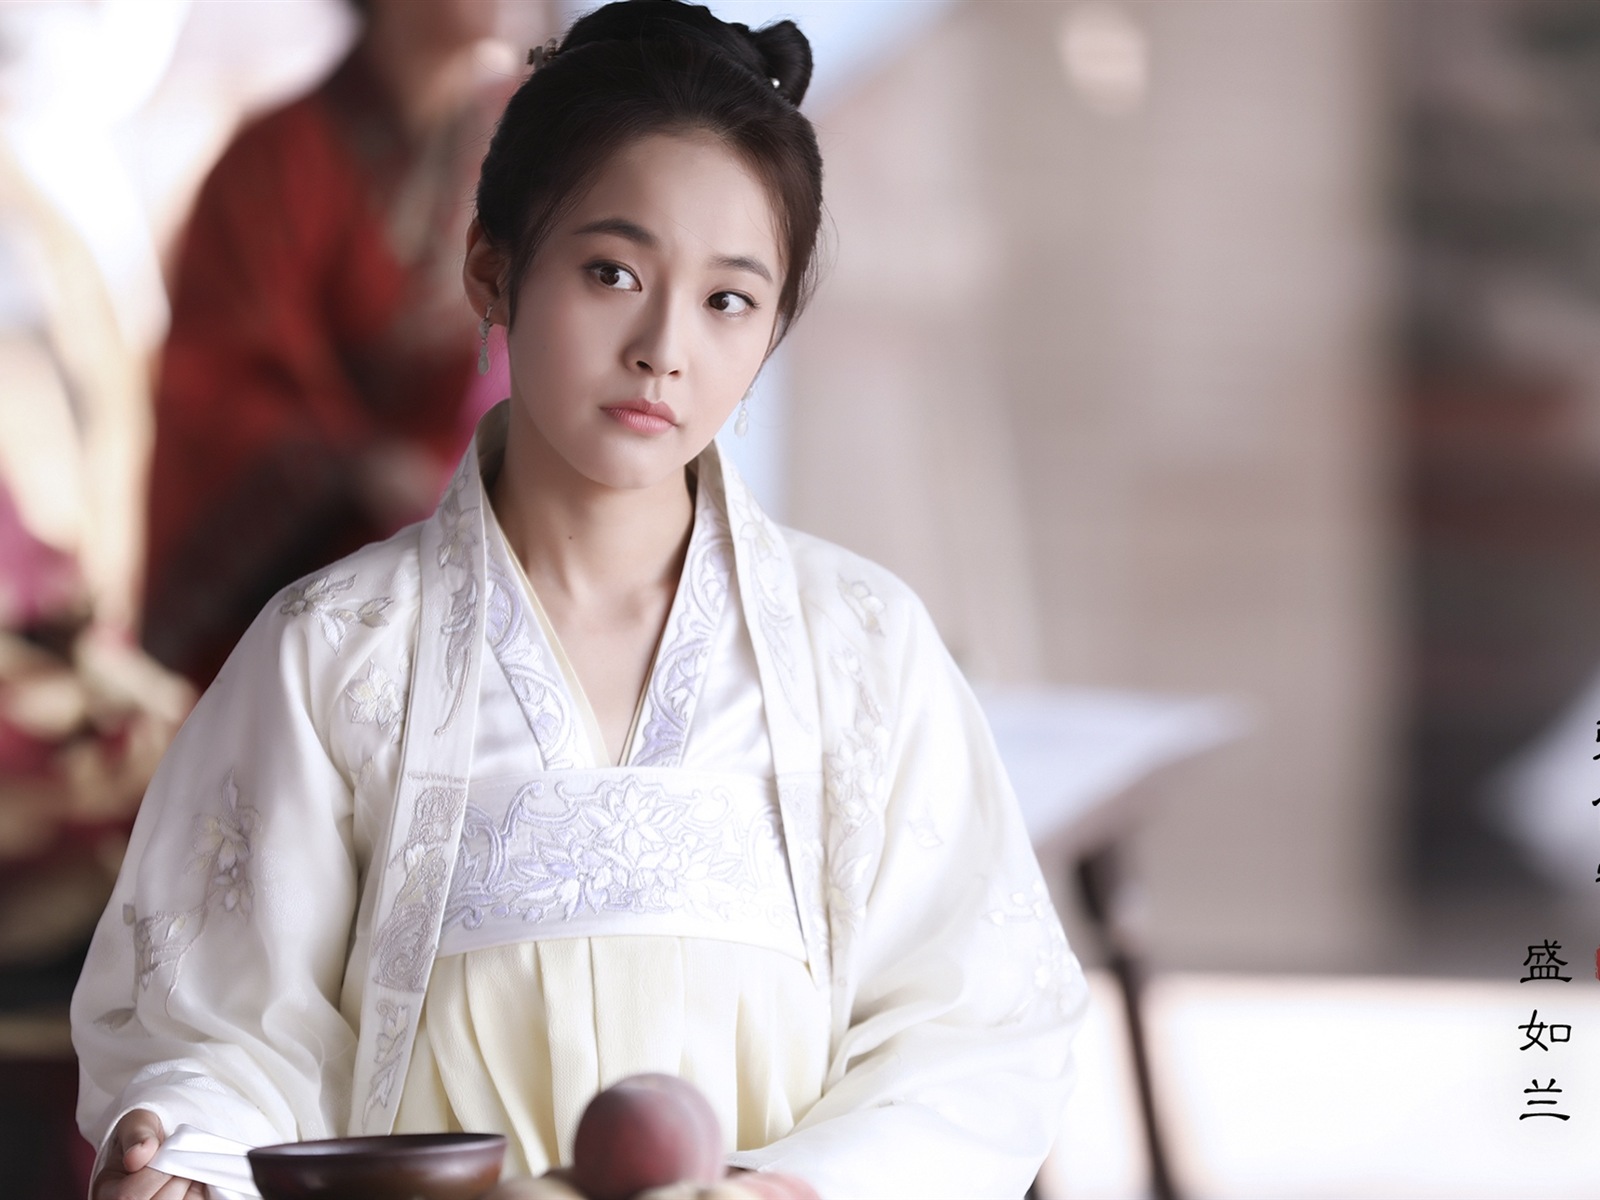 The Story Of MingLan, TV series HD wallpapers #33 - 1600x1200